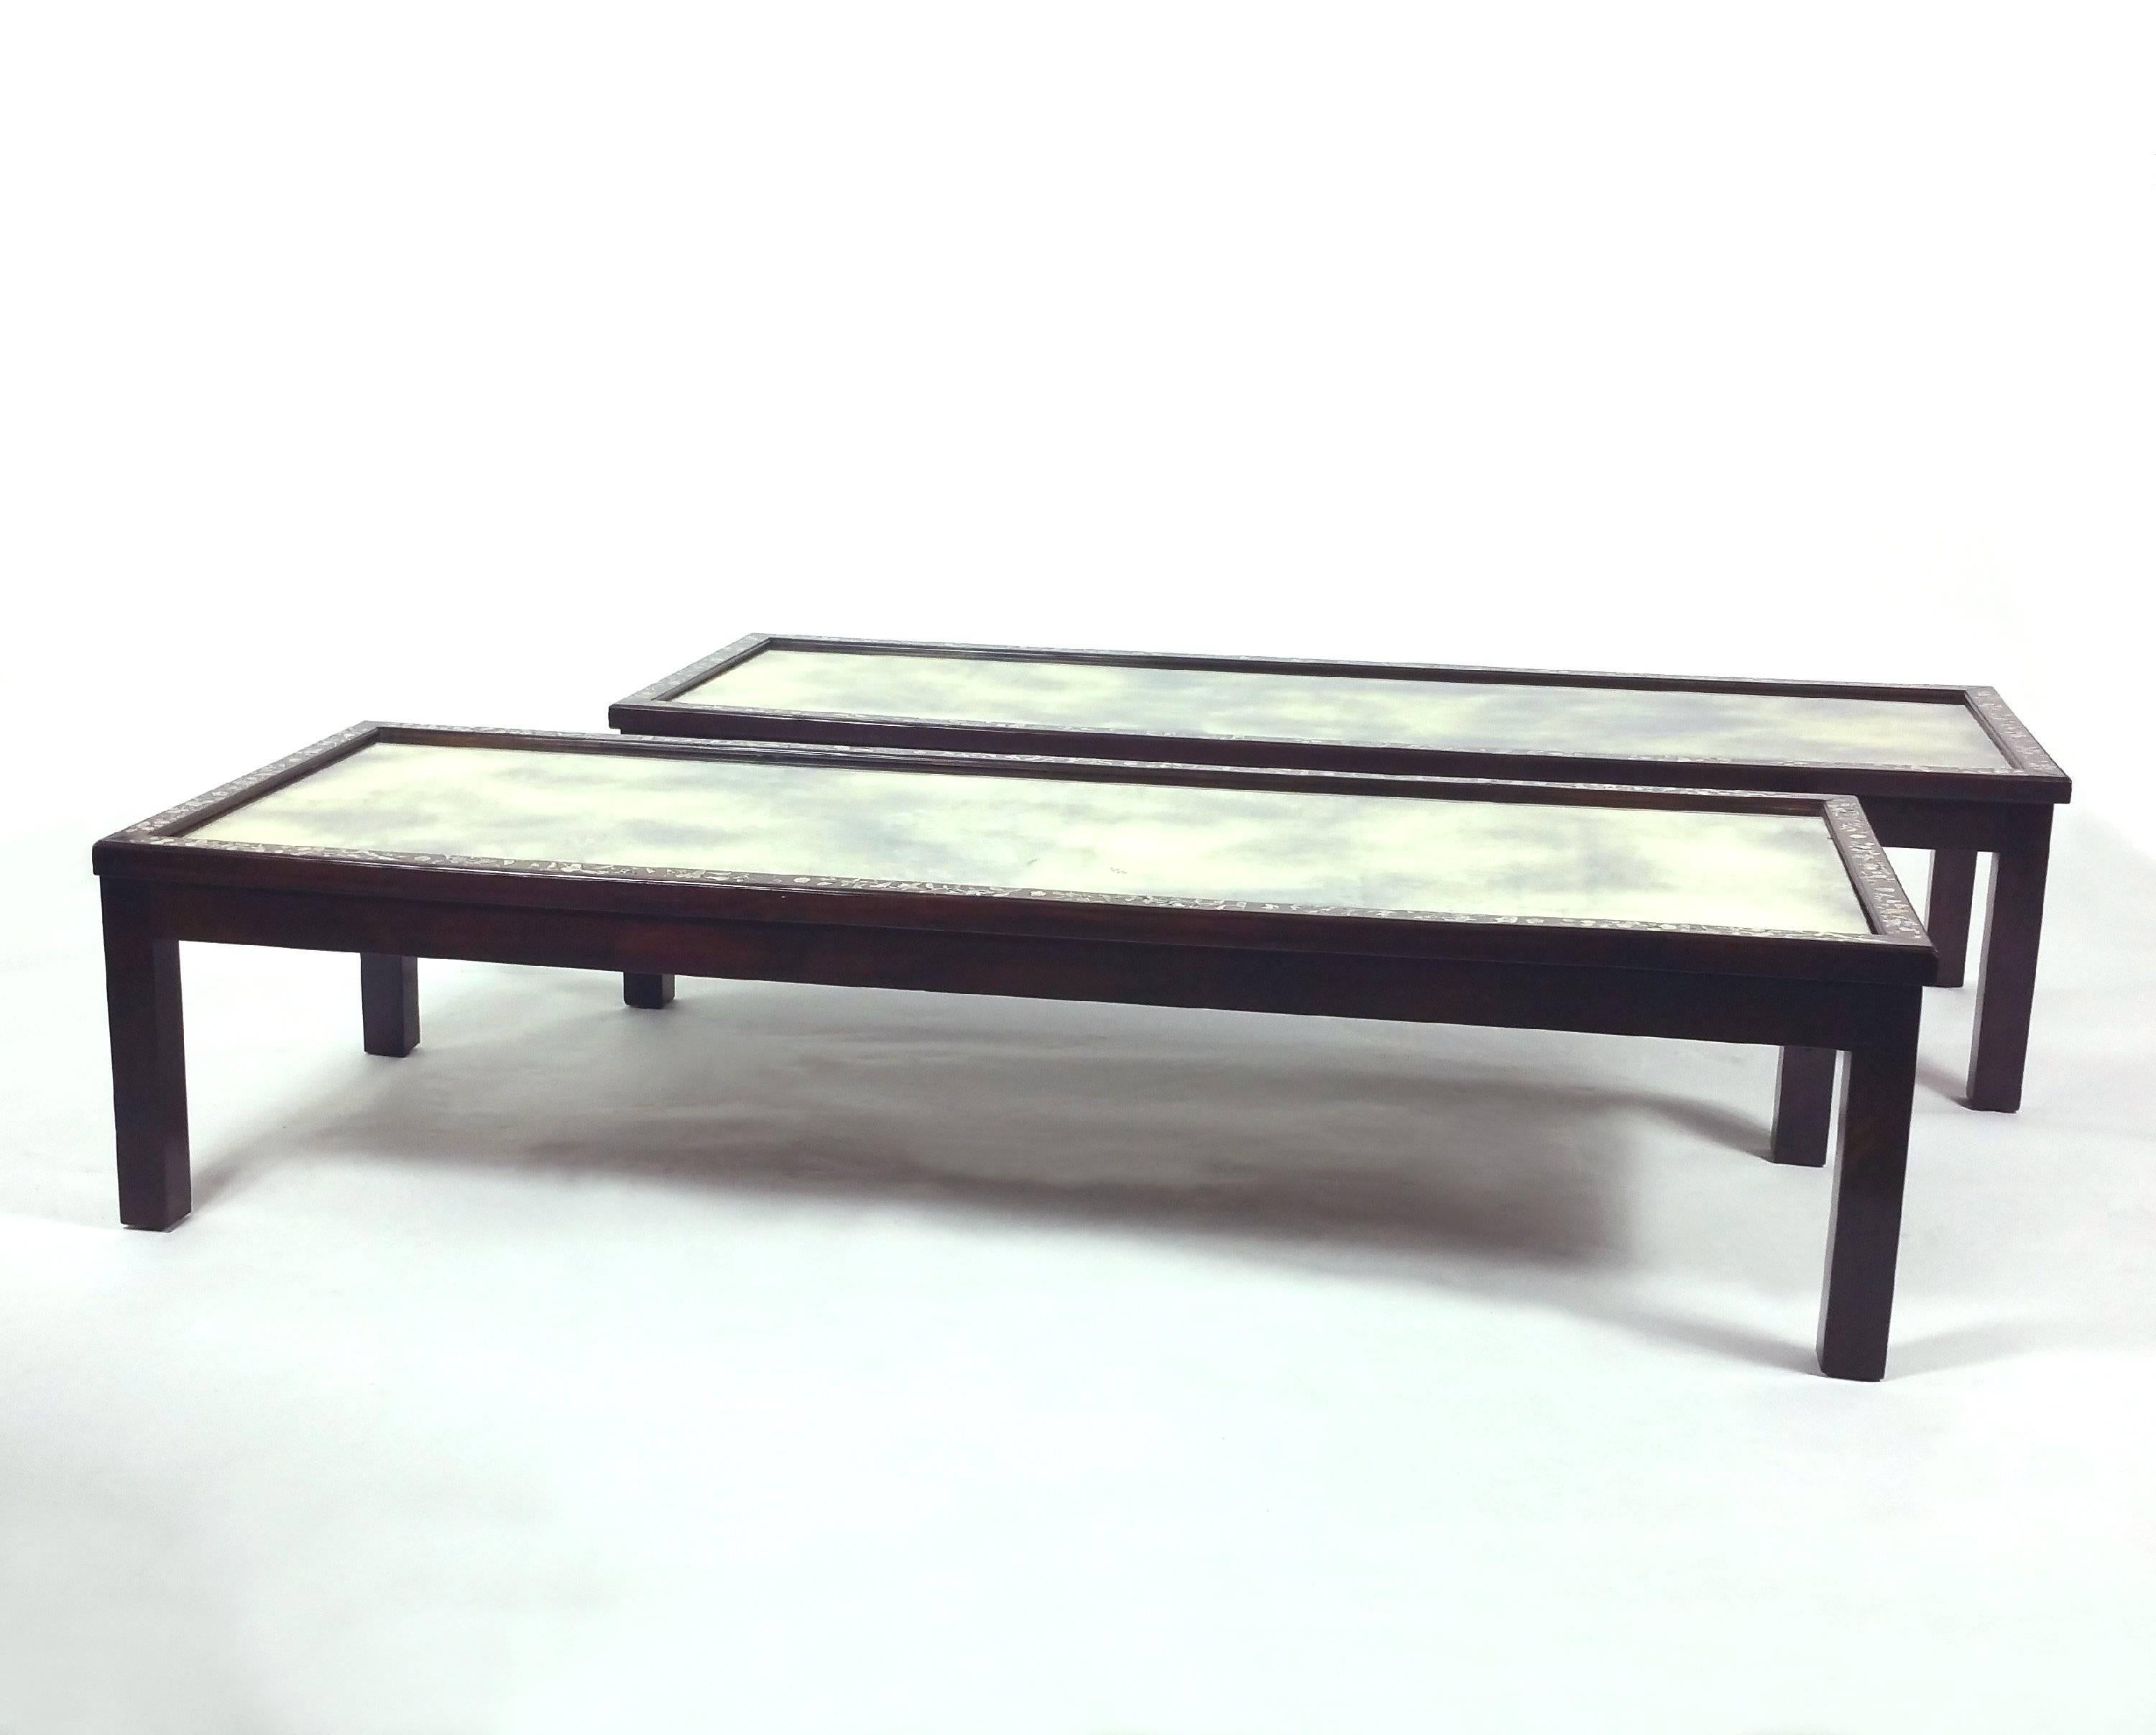 This fine pair of 19th century Chinese coffee tables were converted from two mirrored panels with inlaid mother-of-pearl frames. Each table measures 57 in – 144.8 cm long, 21 3.4 in – 55.2 cm deep and 13 ½ in – 34.3 cm in height. They would make a